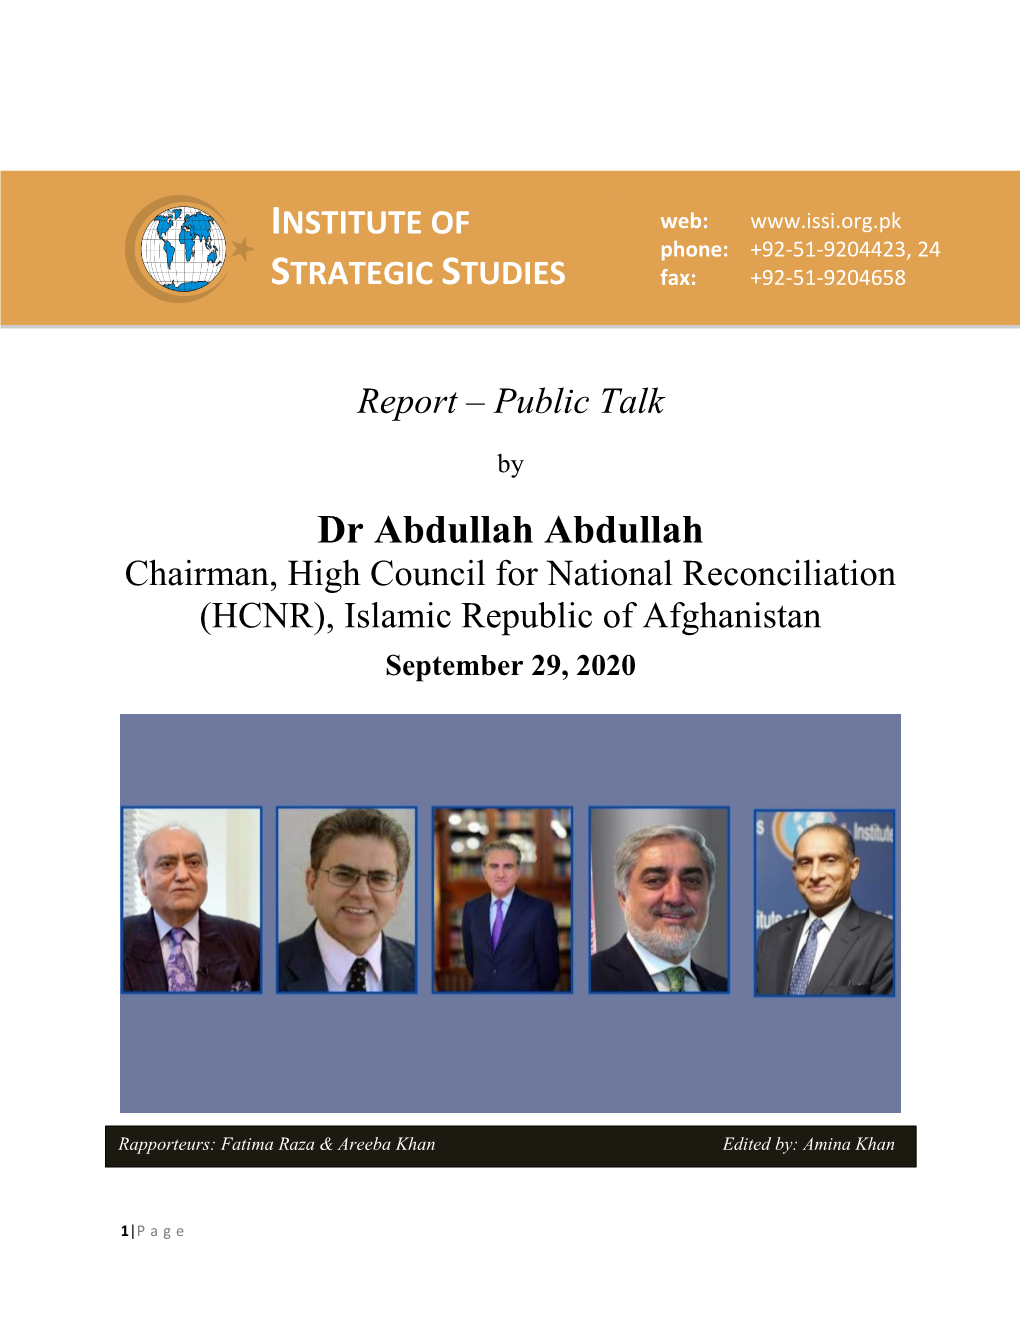 Dr Abdullah Abdullah Chairman, High Council for National Reconciliation (HCNR), Islamic Republic of Afghanistan